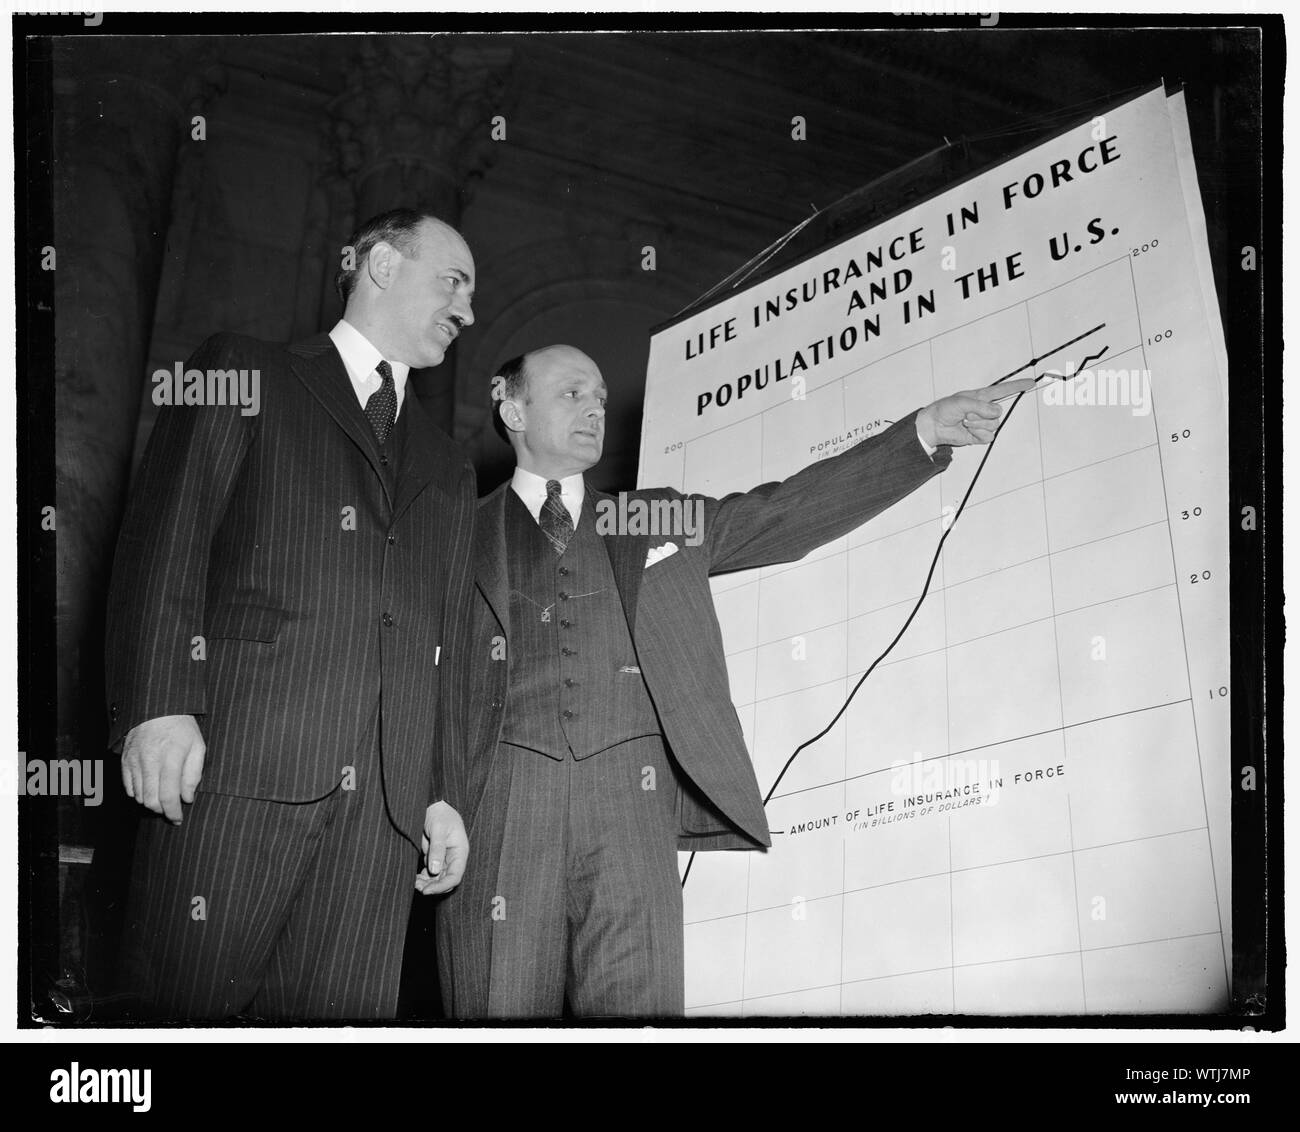 Monopoly committee takes up insurance. Washington, D.C., Feb. 6. The SEC today, through the temporary National Economic Committee, began an investigation of insurance companies and the business. Ernest How, Chief Financial Adviser to the study and Dr. Donald H. Davenport, Special Economic Consultant, first witnesses, here are pointing out one of the mass of charts to be used as statistical matter in the investigation. Dr. Davenport is a former Harvard Professor, now serving with the SEC, 2-6- 39 Stock Photo